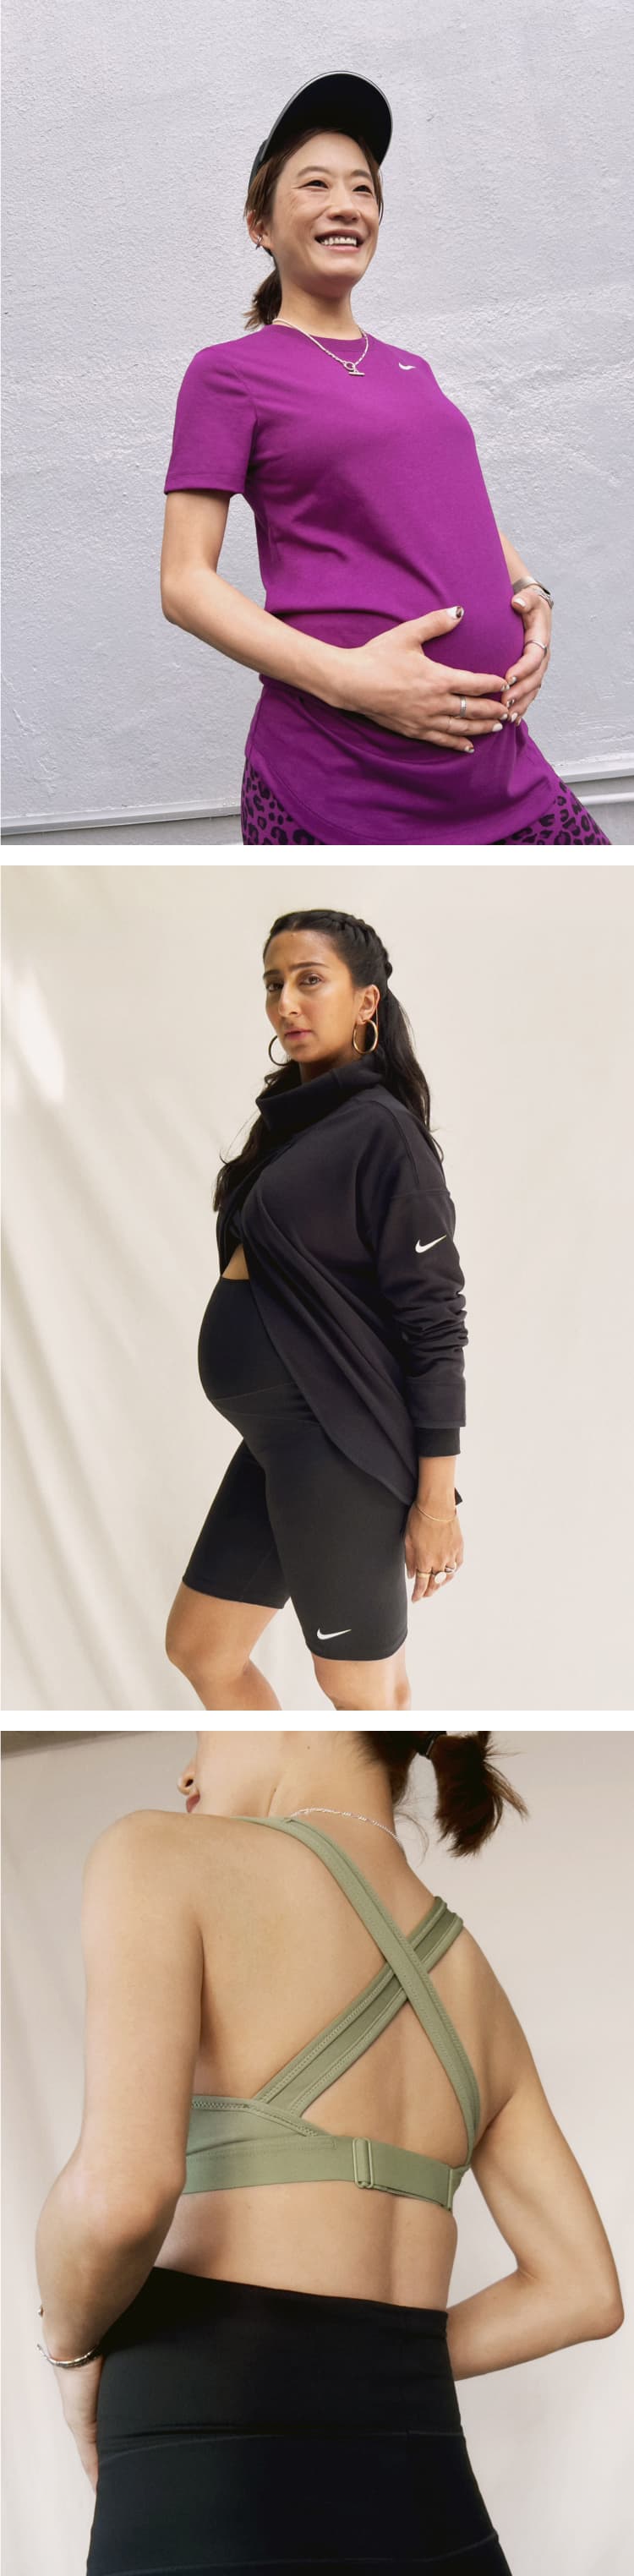  Nursing - Maternity: Clothing, Shoes & Accessories: Dresses,  Tops & Tees, Sleep & Lounge & More